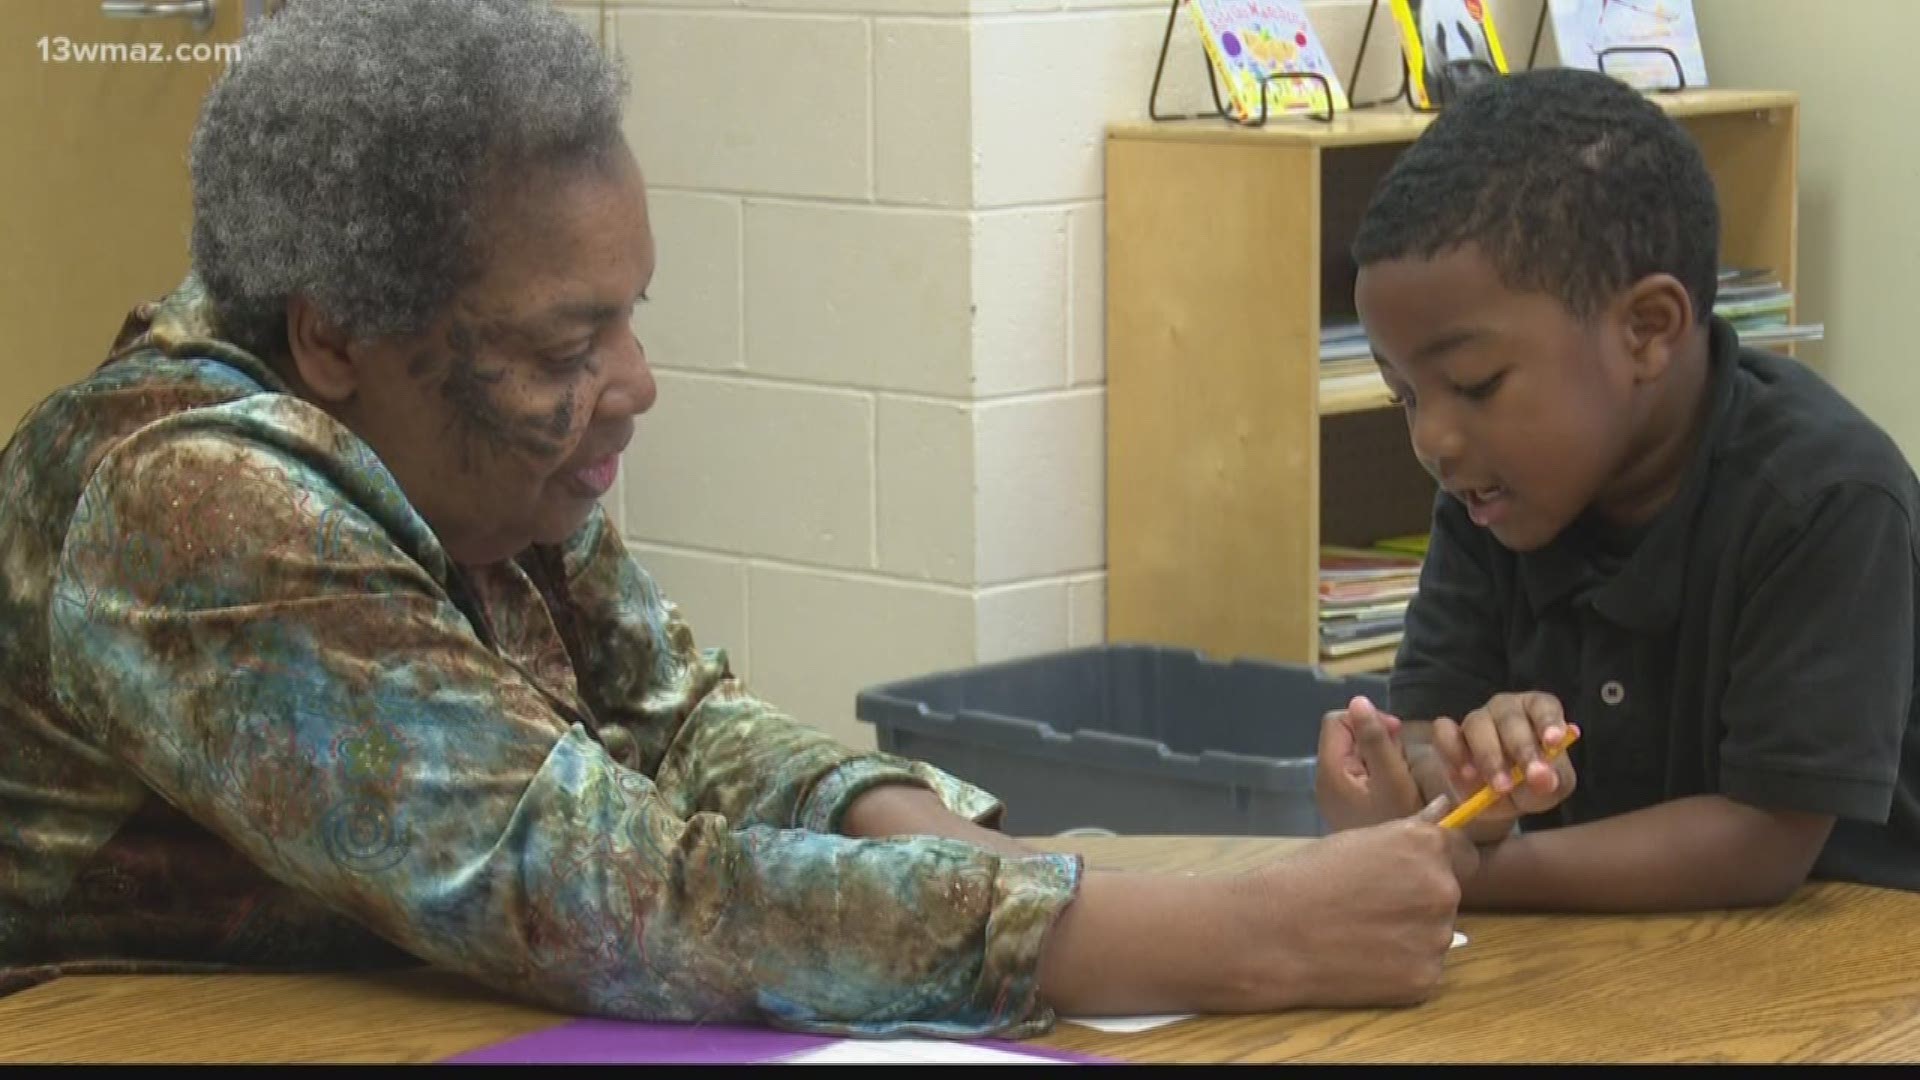 Students in Baldwin County Schools will get more time with a tutor thanks to a $2.5 million federal grant